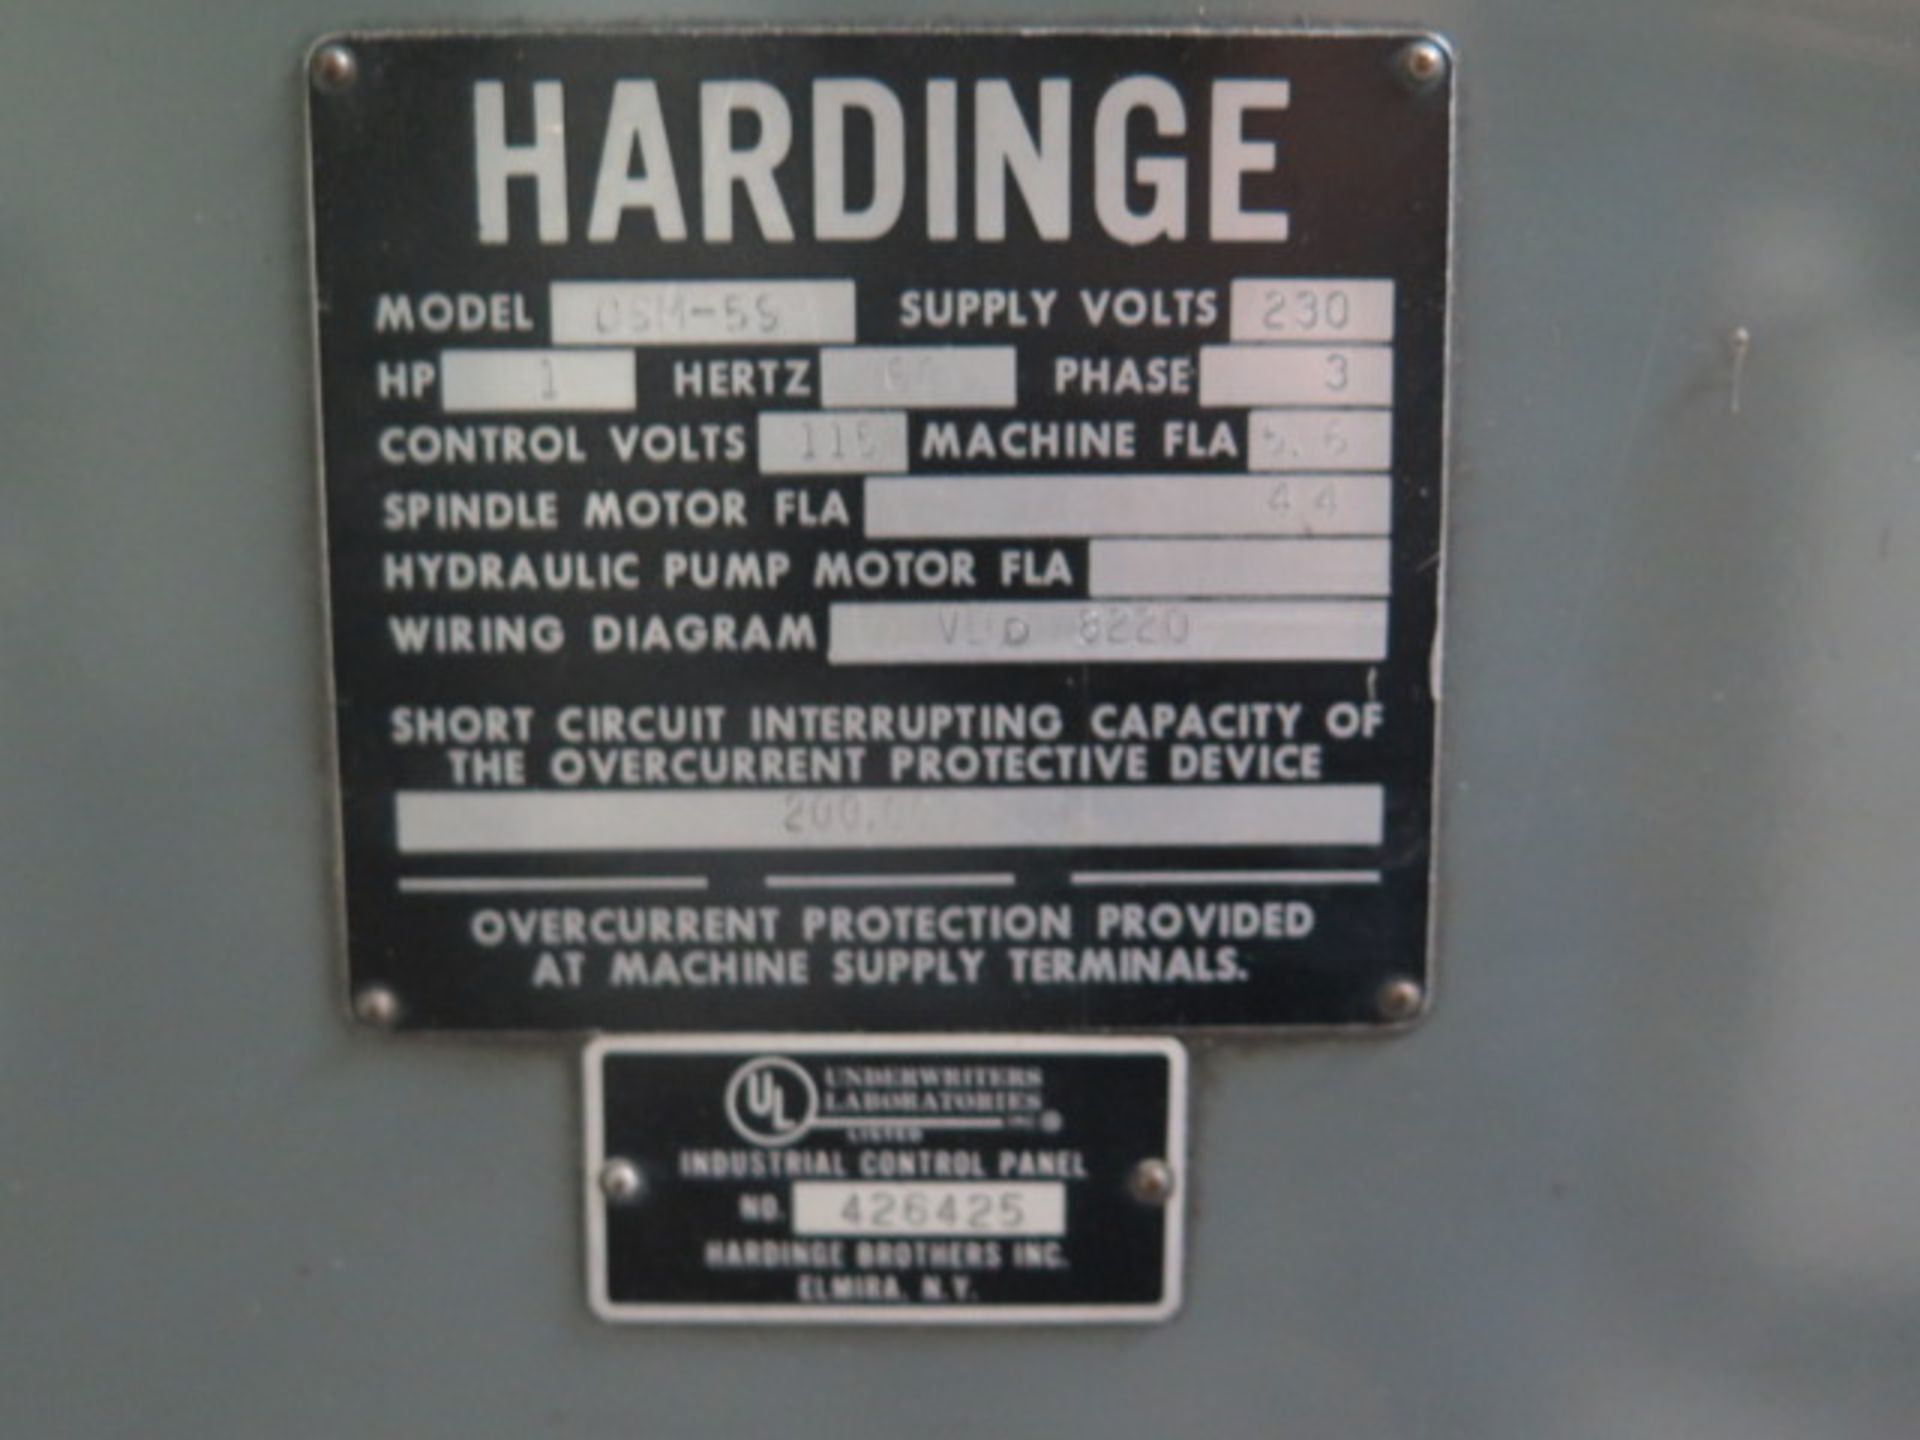 Hardinge DSM-59 Narrow Bed Second OP Lathe s/n DV-59-14302 w/ 230-3500 RPM, 5C Spindle, SOLD AS IS - Image 9 of 9